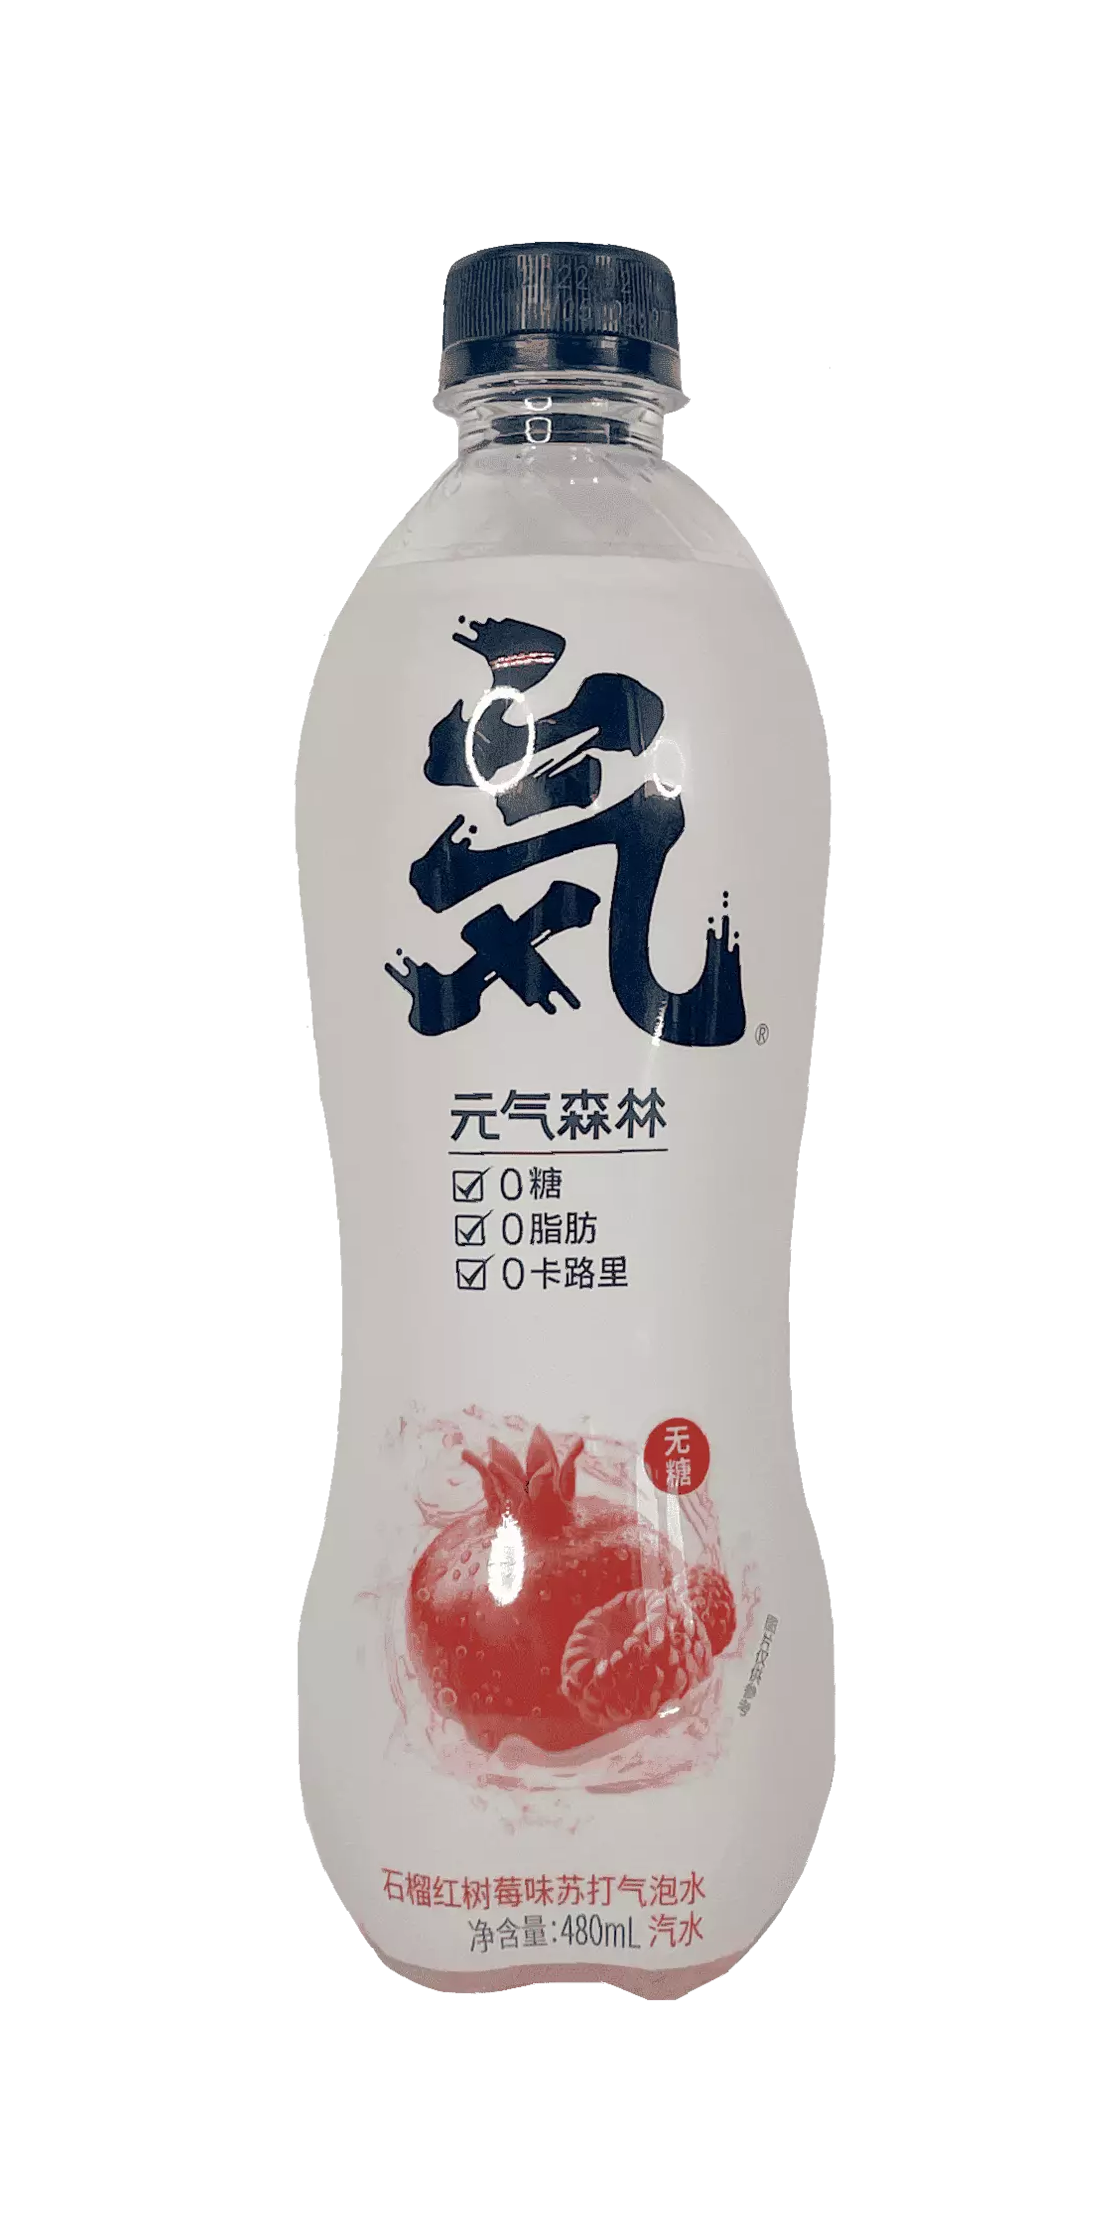 Carbonated Water With Pomegranate, Raspberry Flavor 480ml/Bottle Yuan Qi Sen Lin China